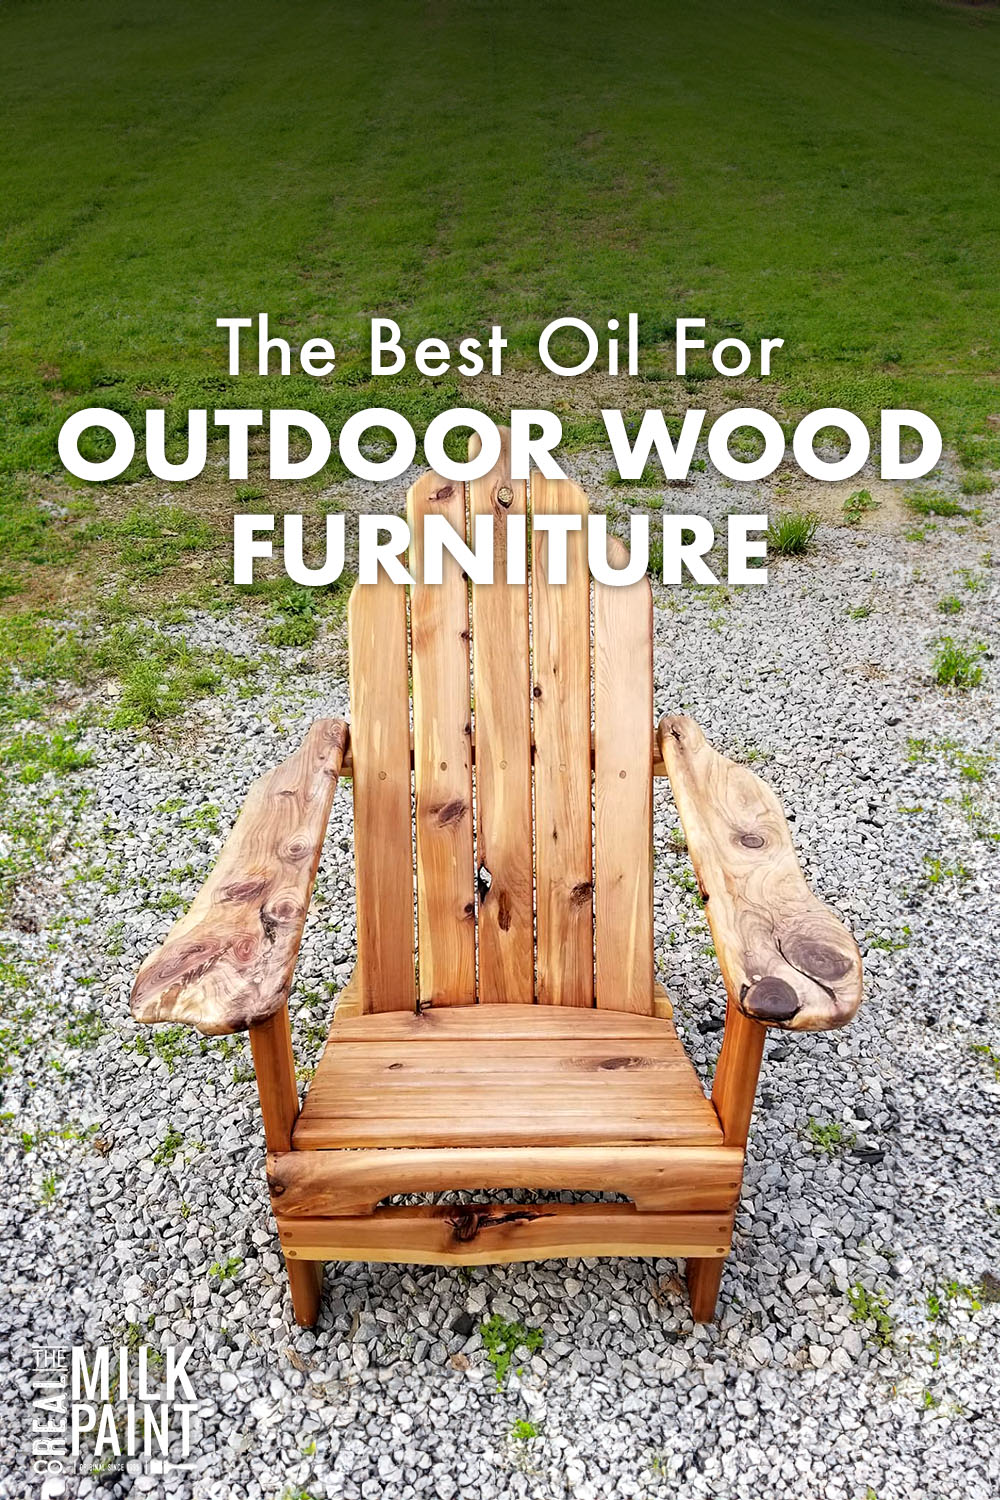  Nordicare Sealing Wood Oil for Outdoor Garden Furniture - Teak  Oil for Wood Outdoor Furniture - Suitable for All Outdoor Types of Wood,  Danish Oil for Wood Exterior Protection - Easy